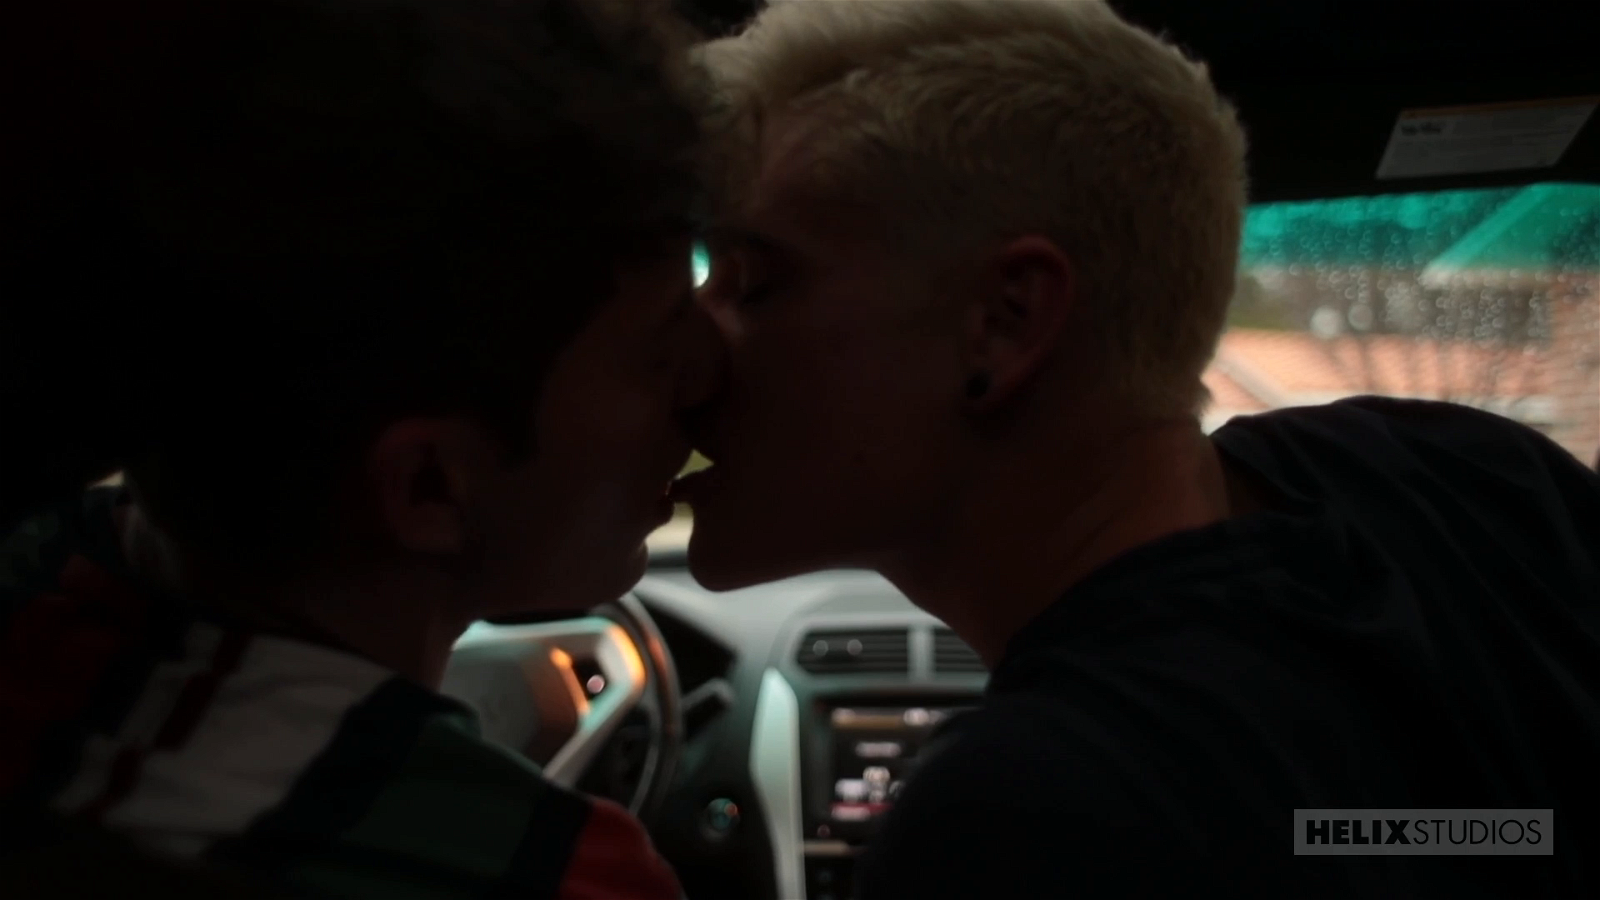 Video by GayPorn with the username @GayPorn,  February 19, 2019 at 12:05 AM and the text says 'Raging Hard On: https://refer.helixstudios.net/track/MTAxMTYxLjMuOS45LjYuMC4wLjAuMA/video/6417/raging-hard-on.html'